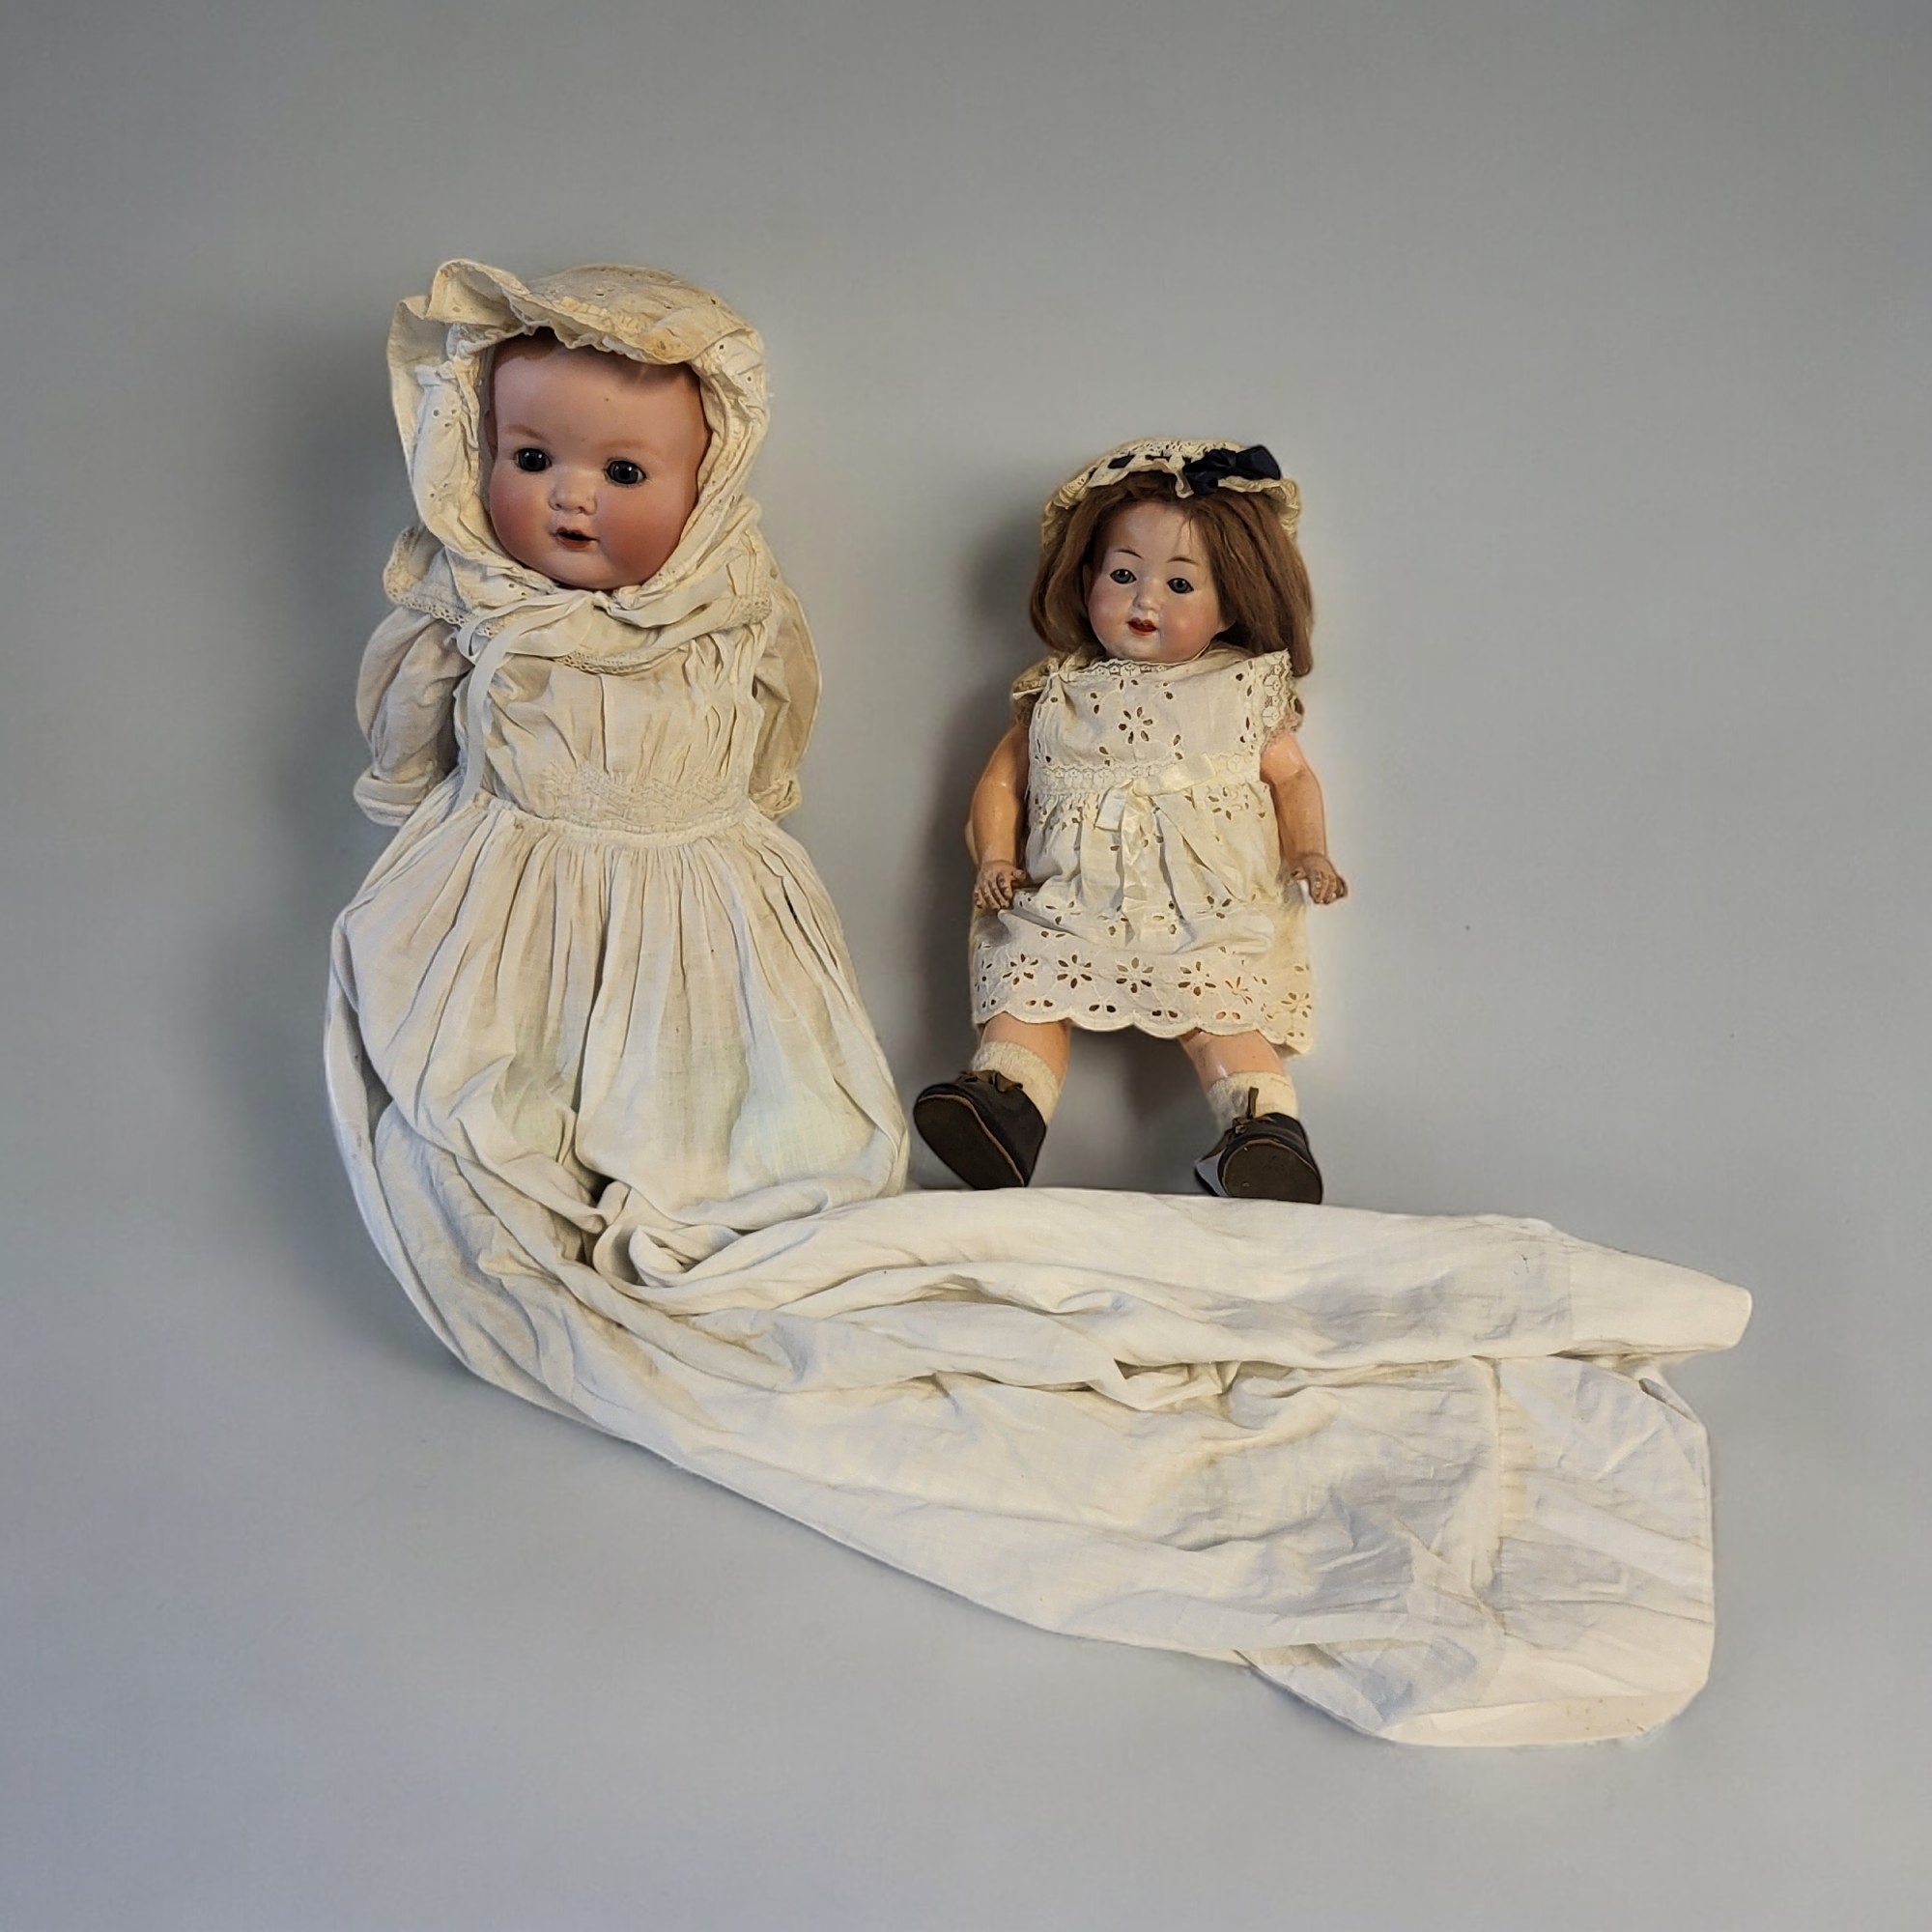 ARMAND MARSEILLE, BISQUE HEADED BEBE DOLL Five piece jointed composition body, glass open and